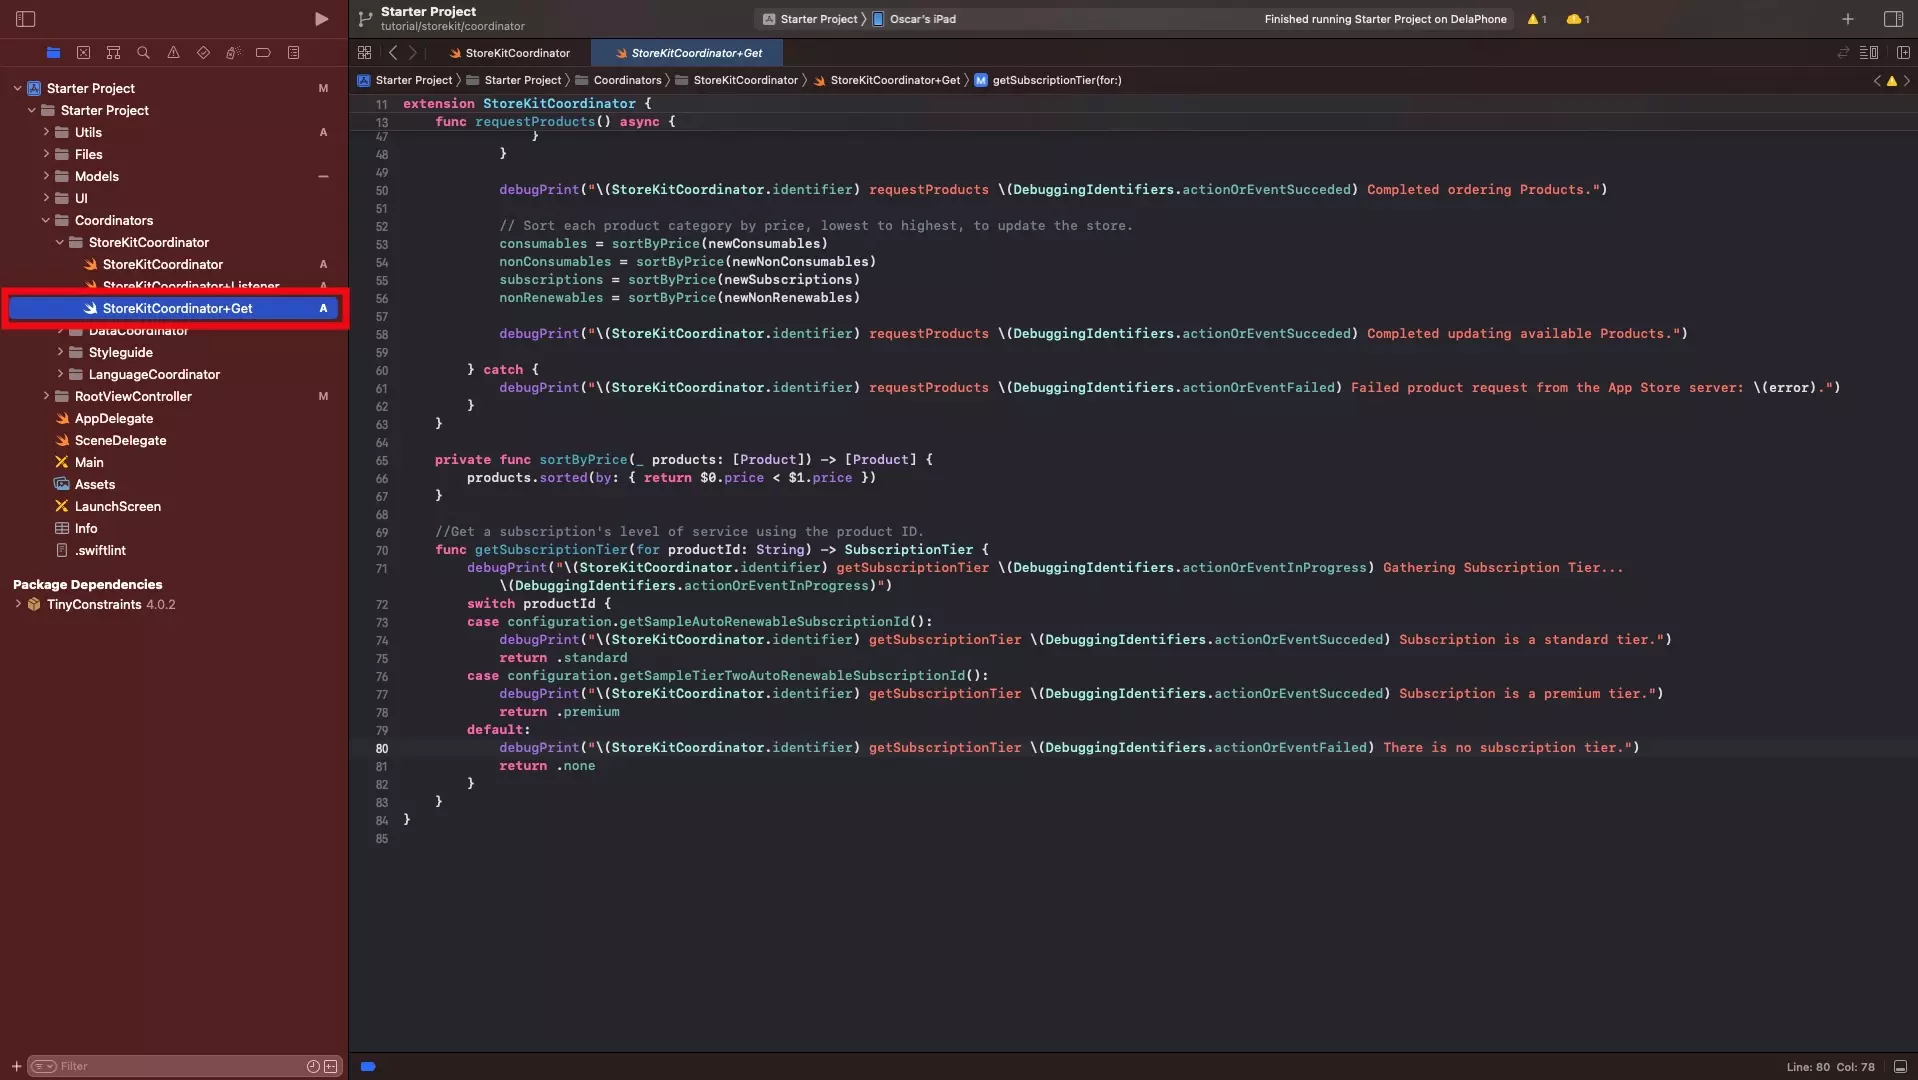 A screenshot of XCode showing the StoreKitCoordinator Get products extension. Code available below.